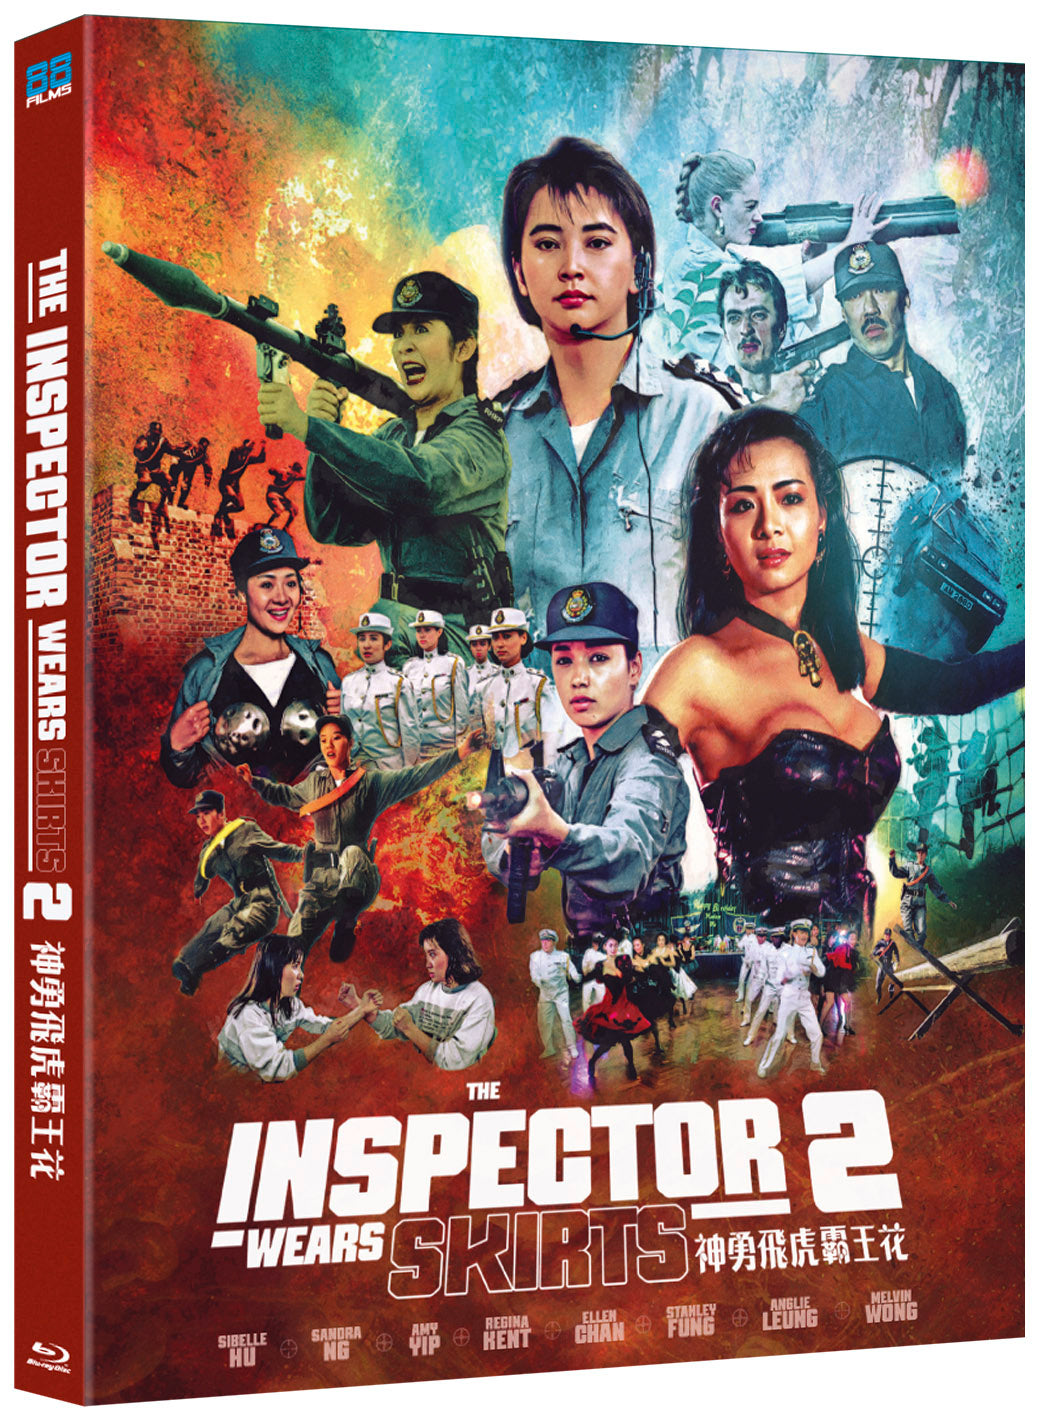 The Inspector Wears Skirts 2 Blu-ray with Slipcover (88 Films U.S.) [Preorder]